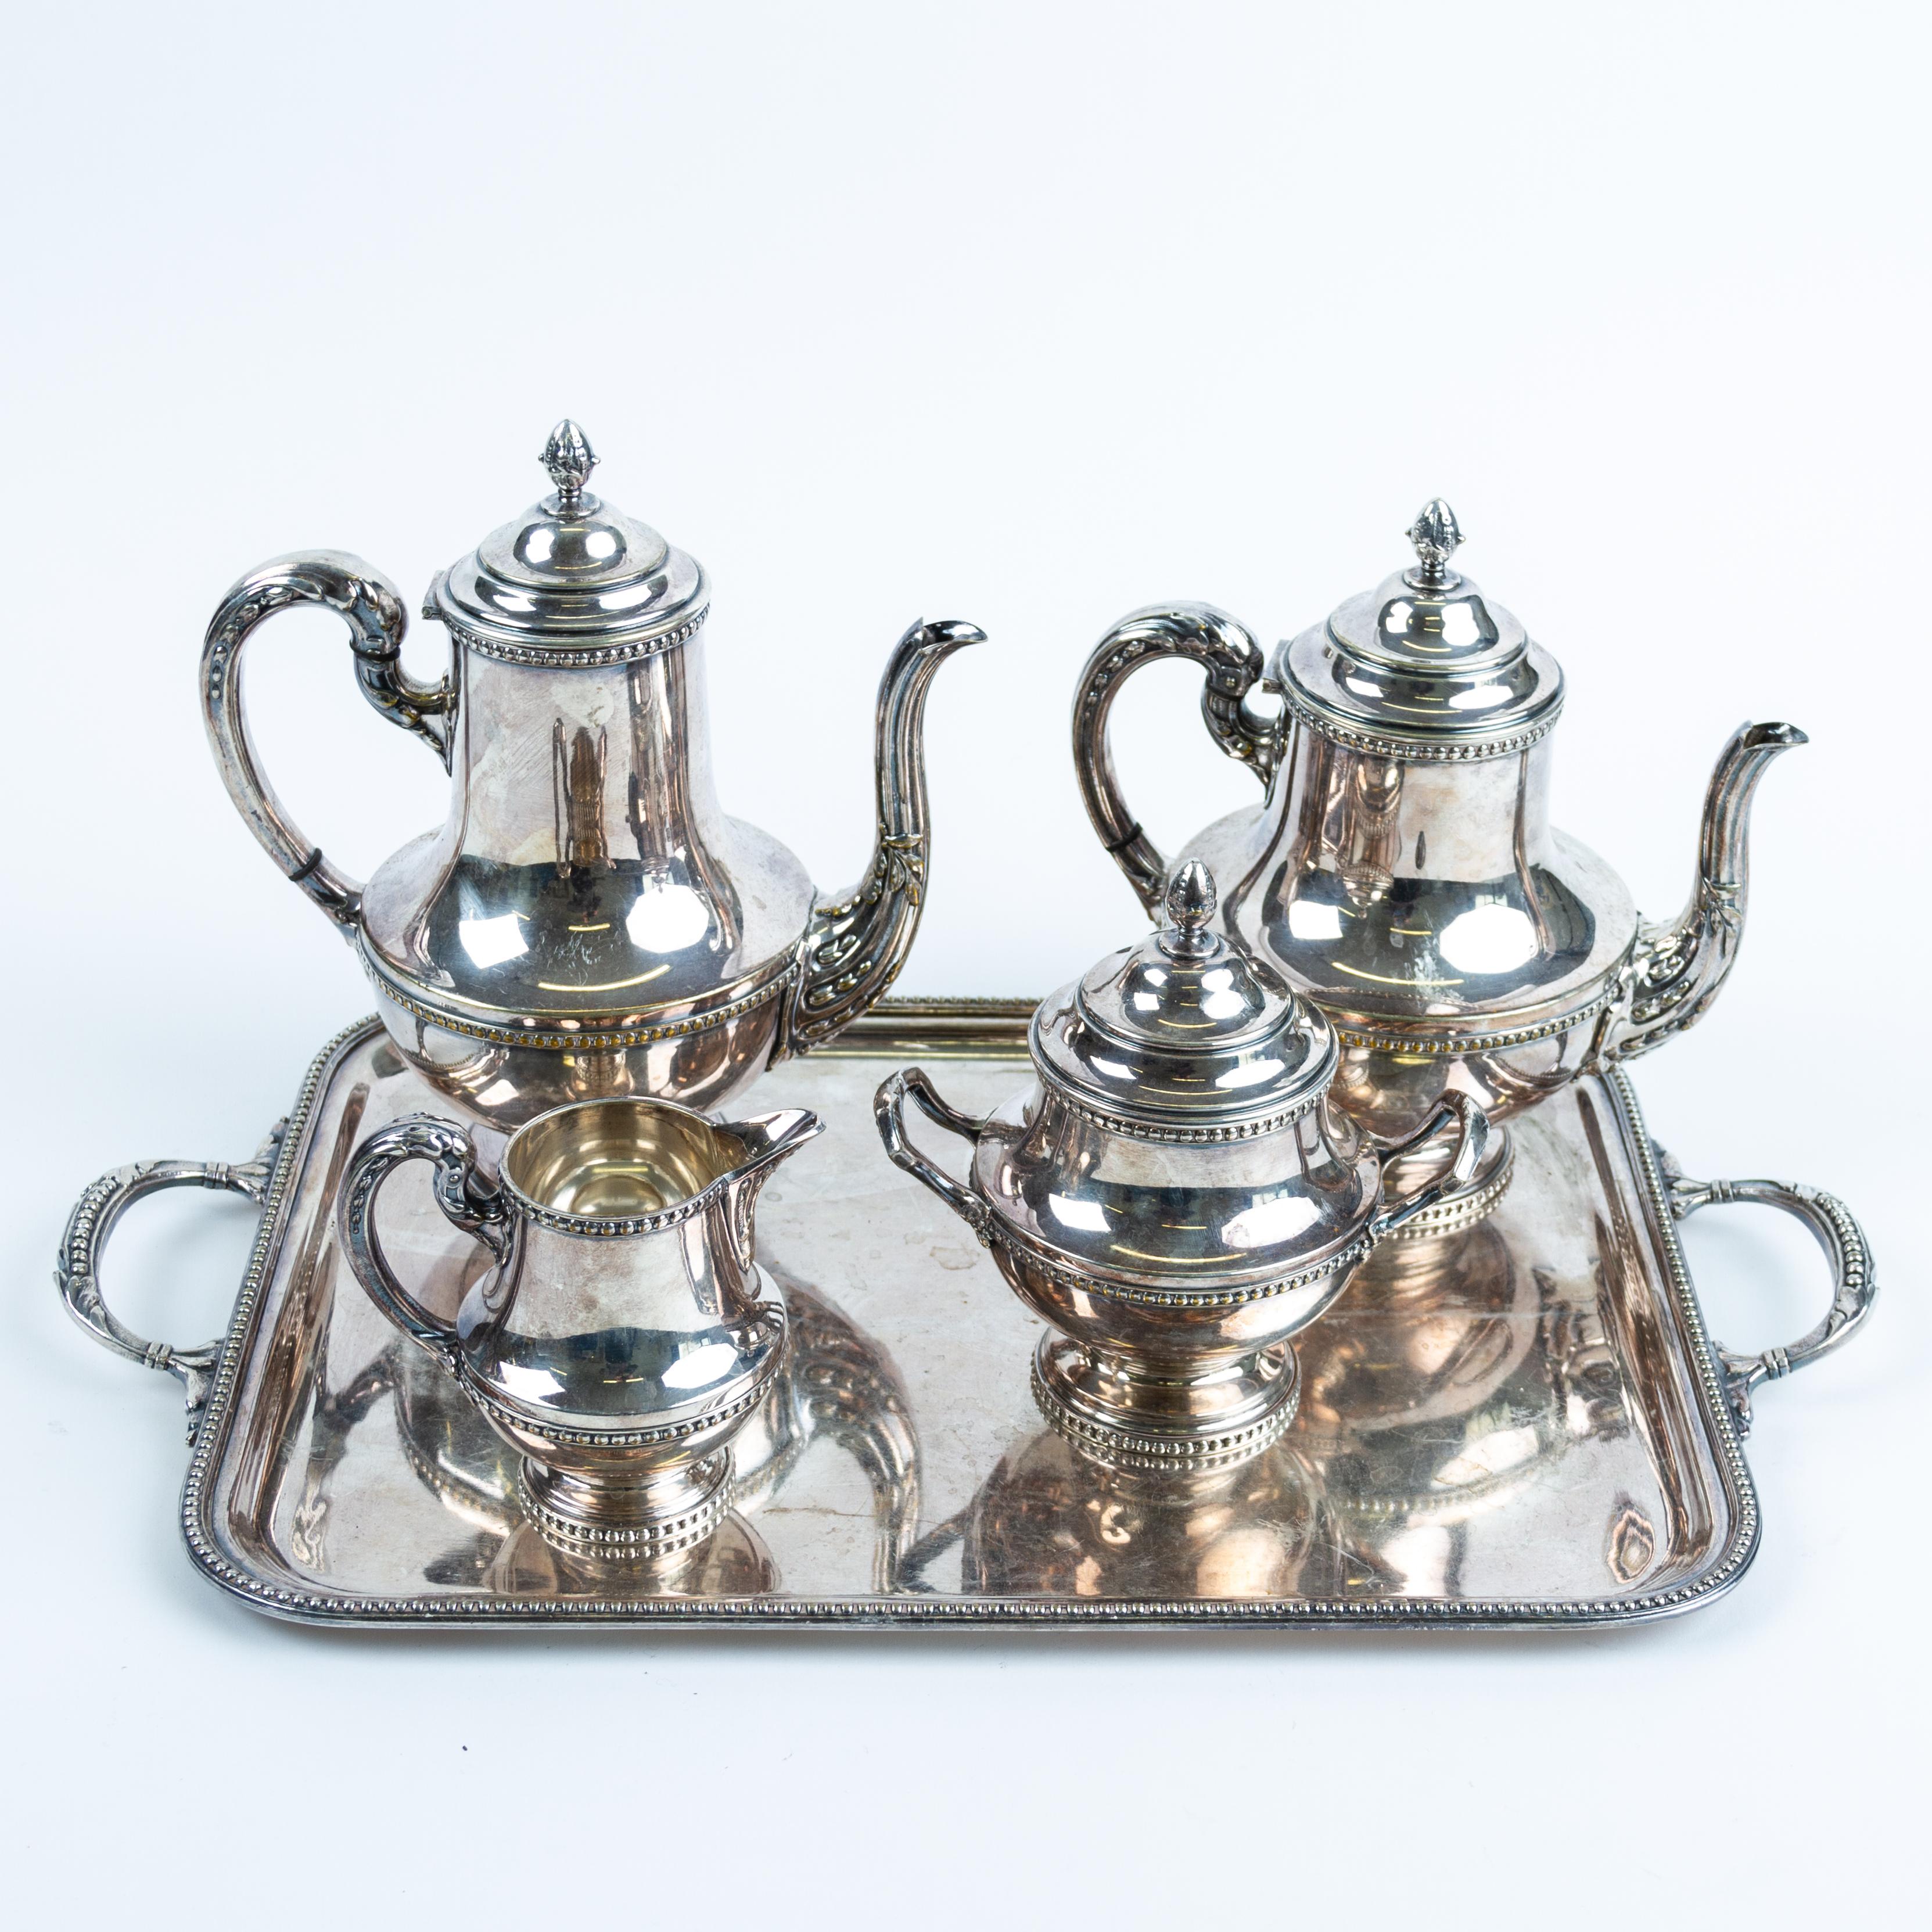 Fabulous Continental Silver-Plated Coffee & Tea Serving Set 
Good condition
Free international shipping.